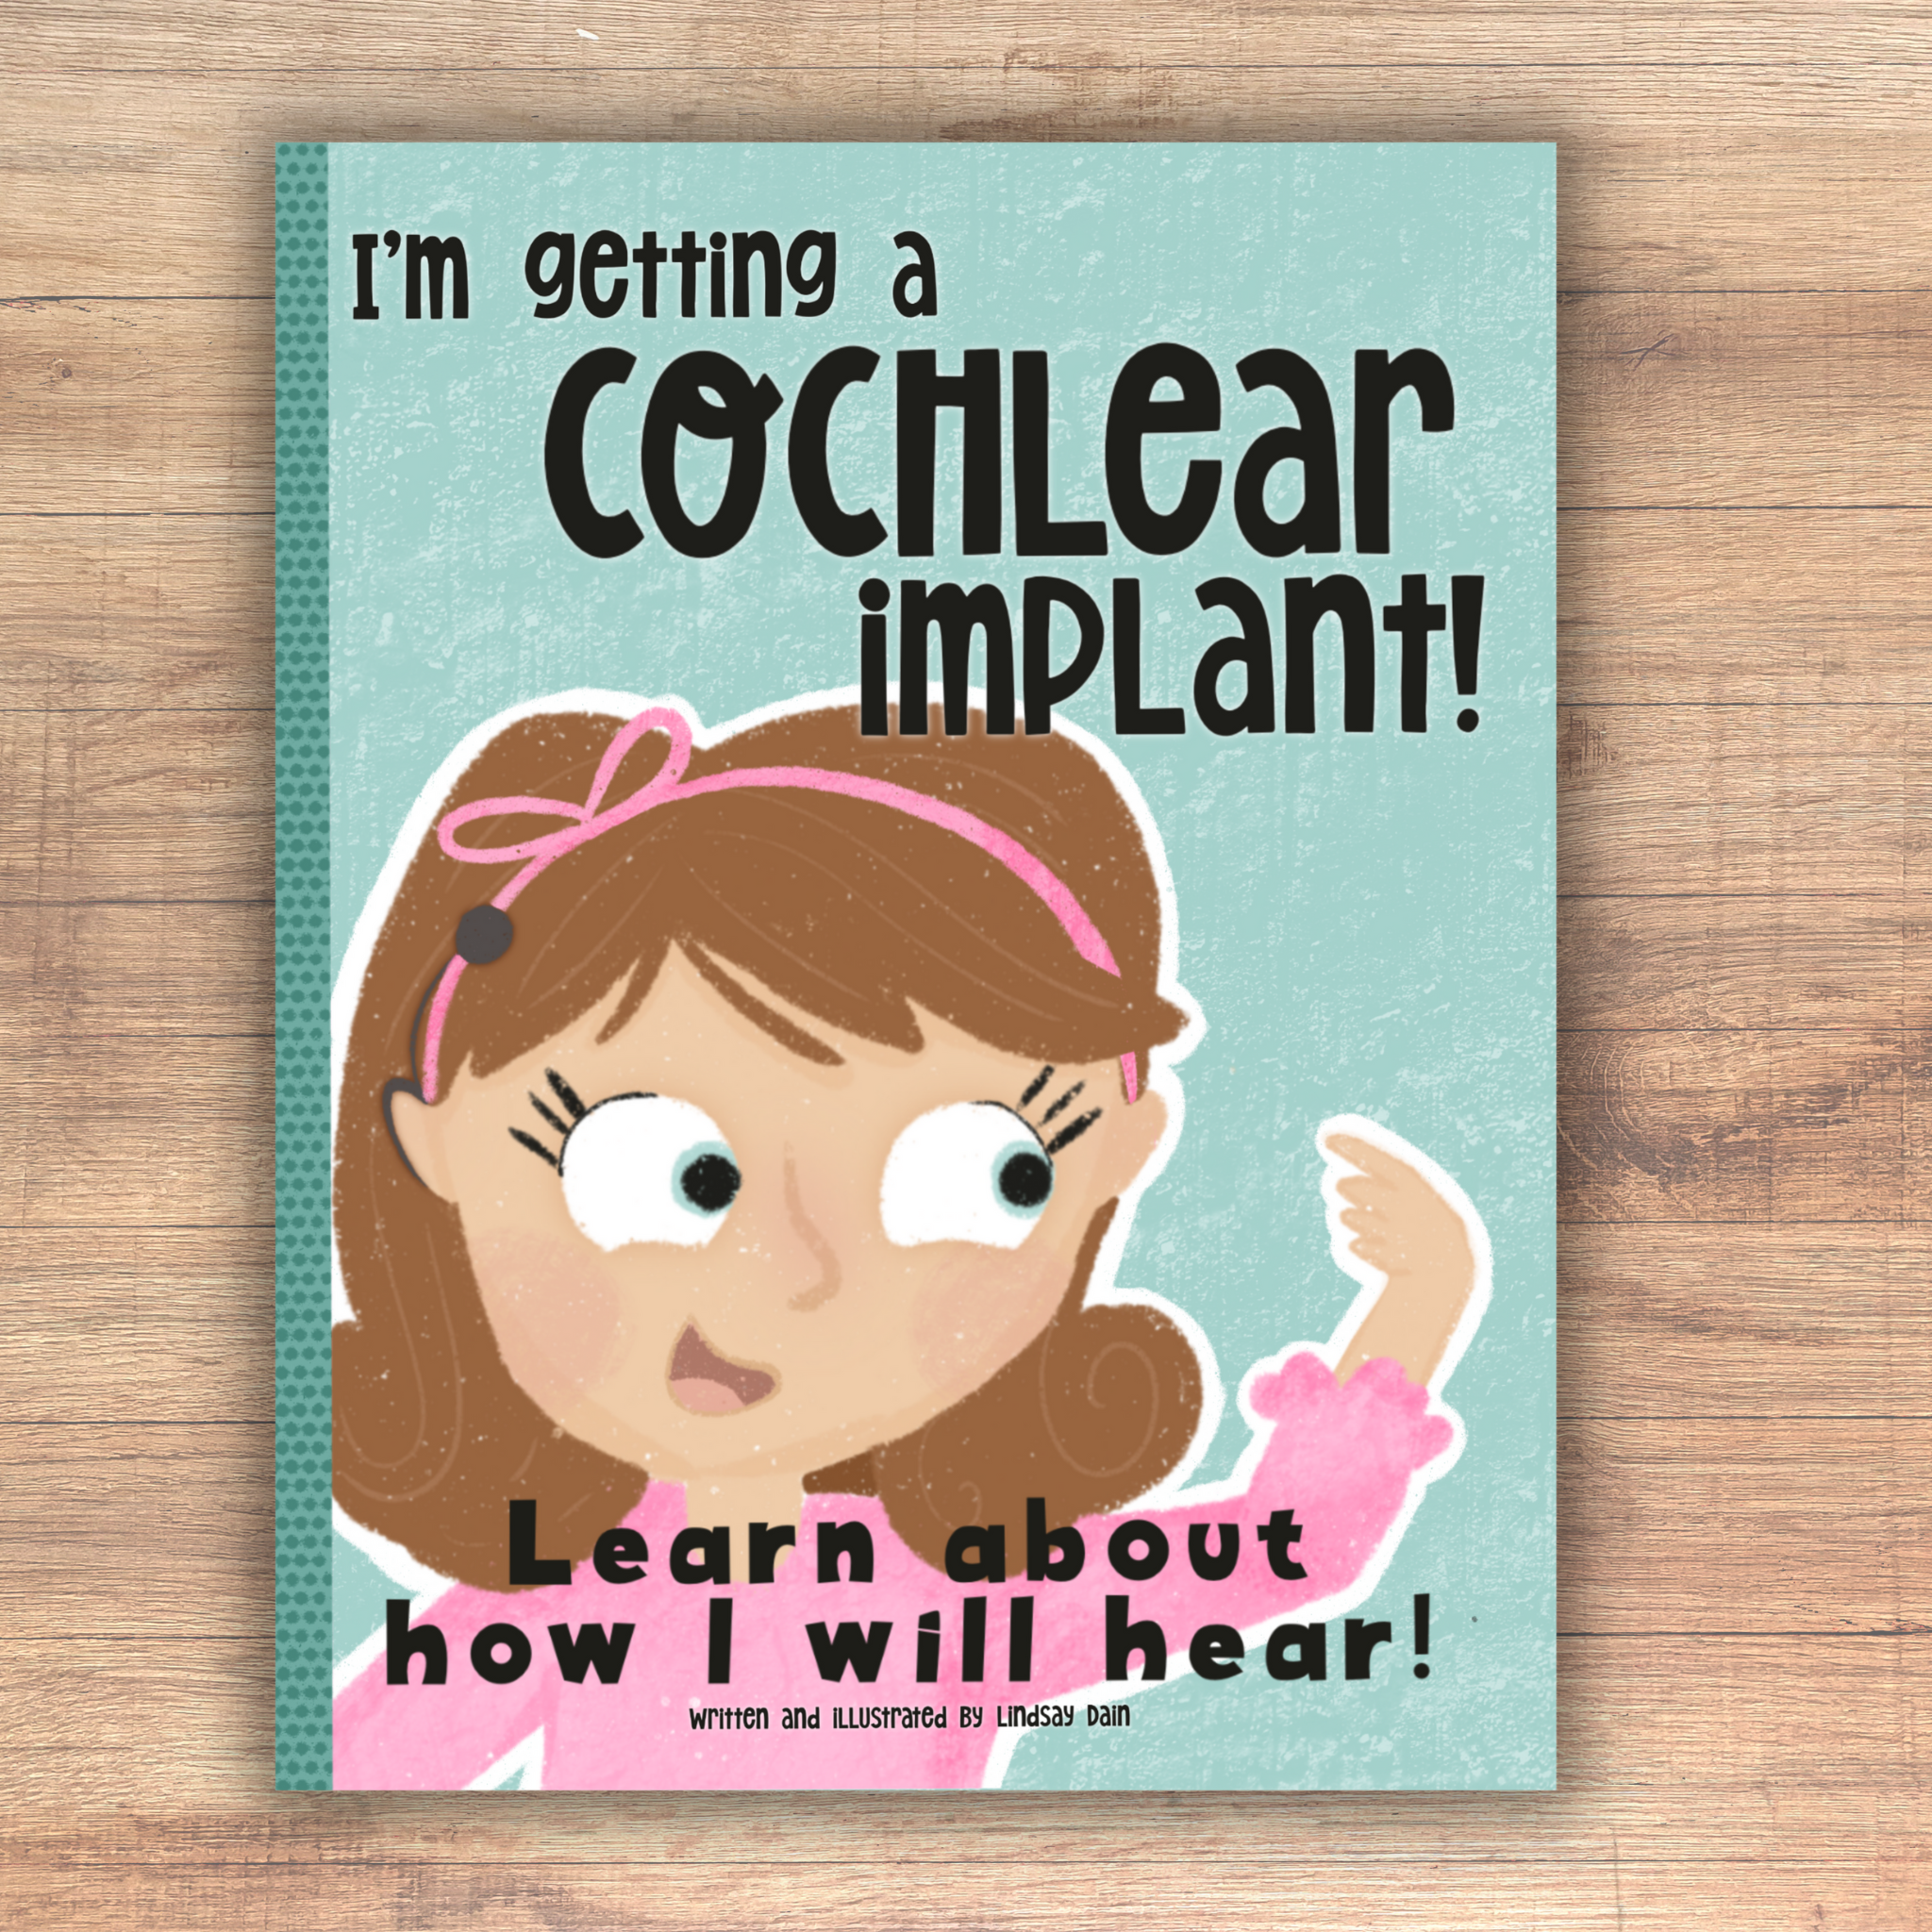 Image of the front cover of the self published book called "I'm Getting a Cochlear Implant: Learn About How I Will Hear!" on the Kindle Direct Publishing platform